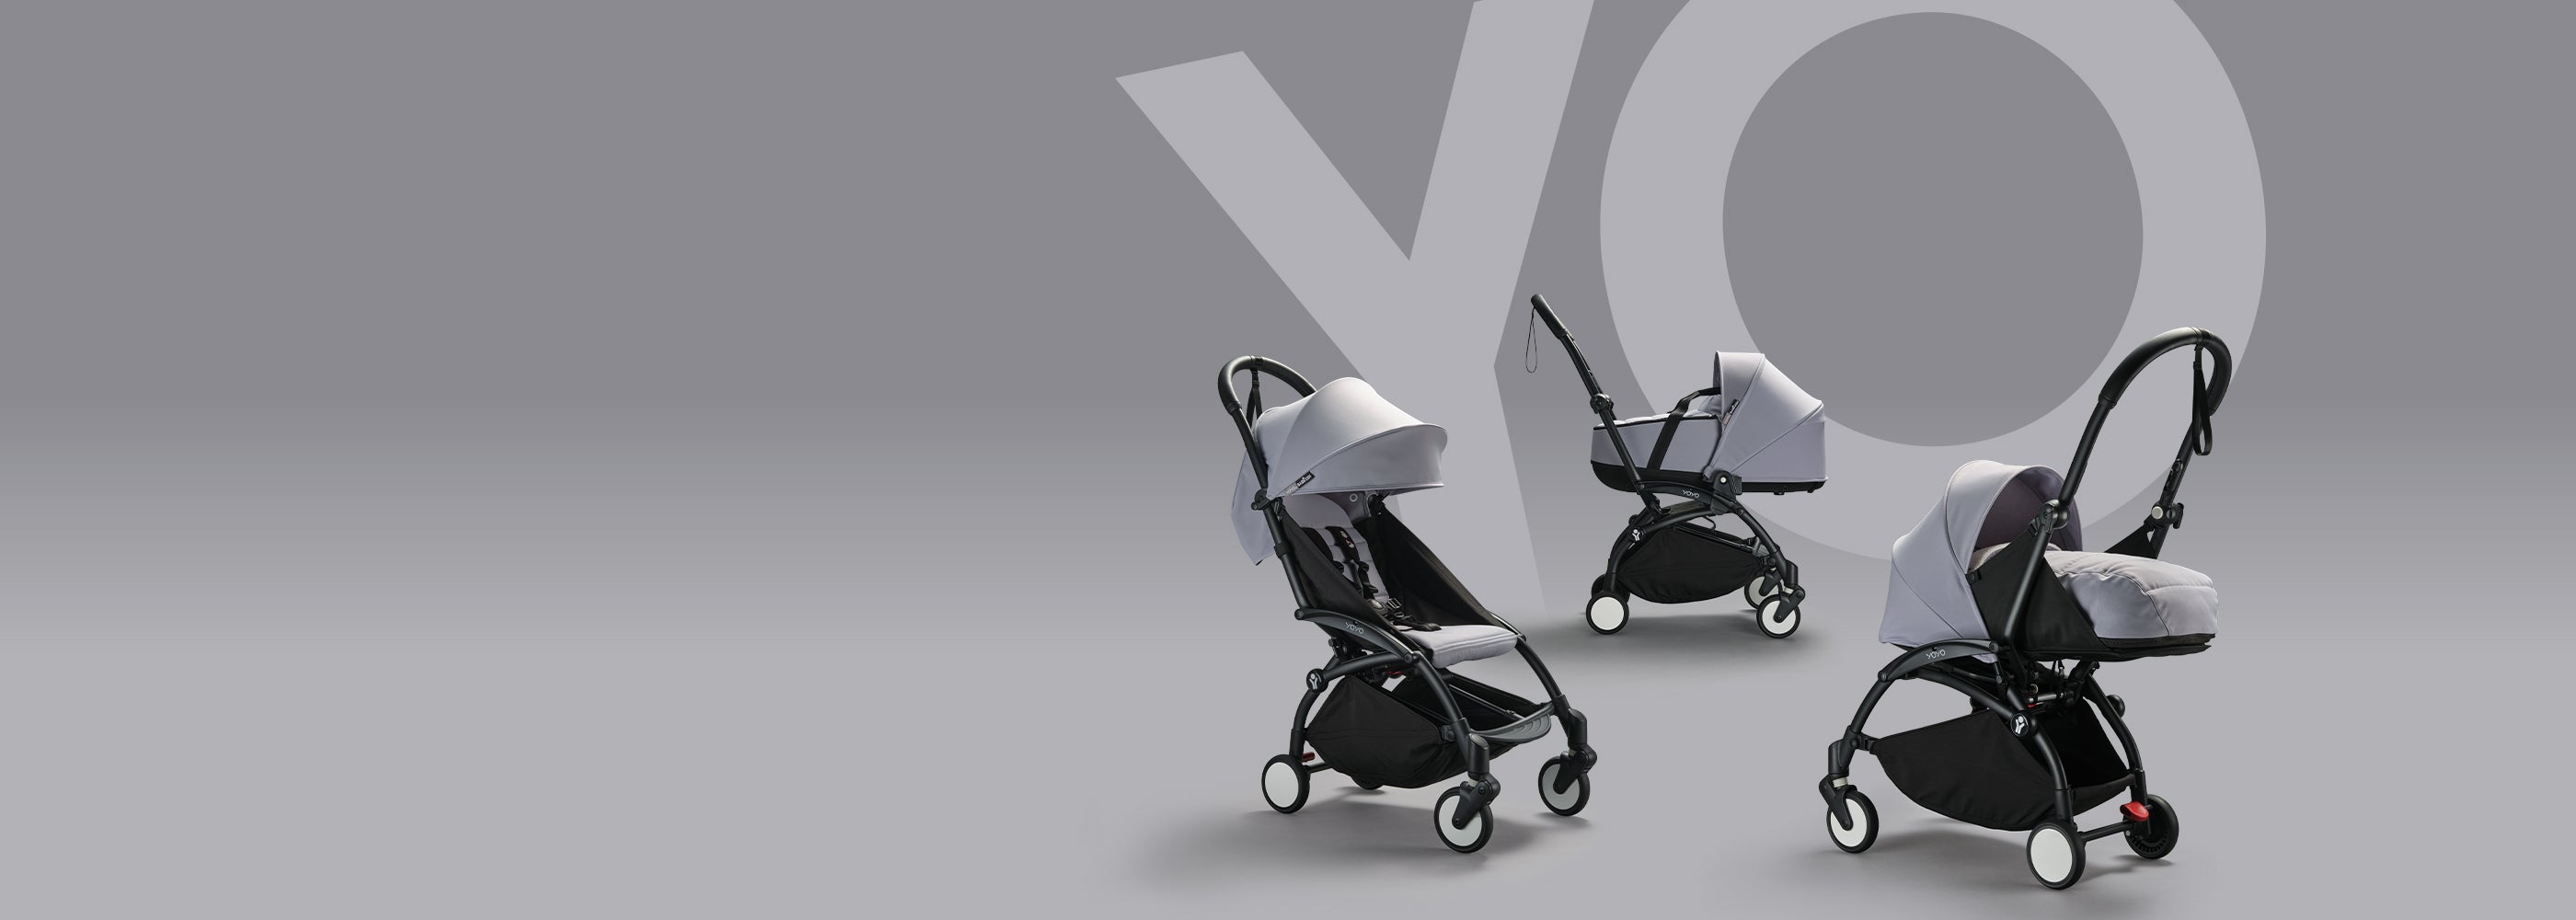 BabyZen Yoyo 6 + Hire the Best Holiday Buggy from Dublin and Malaga